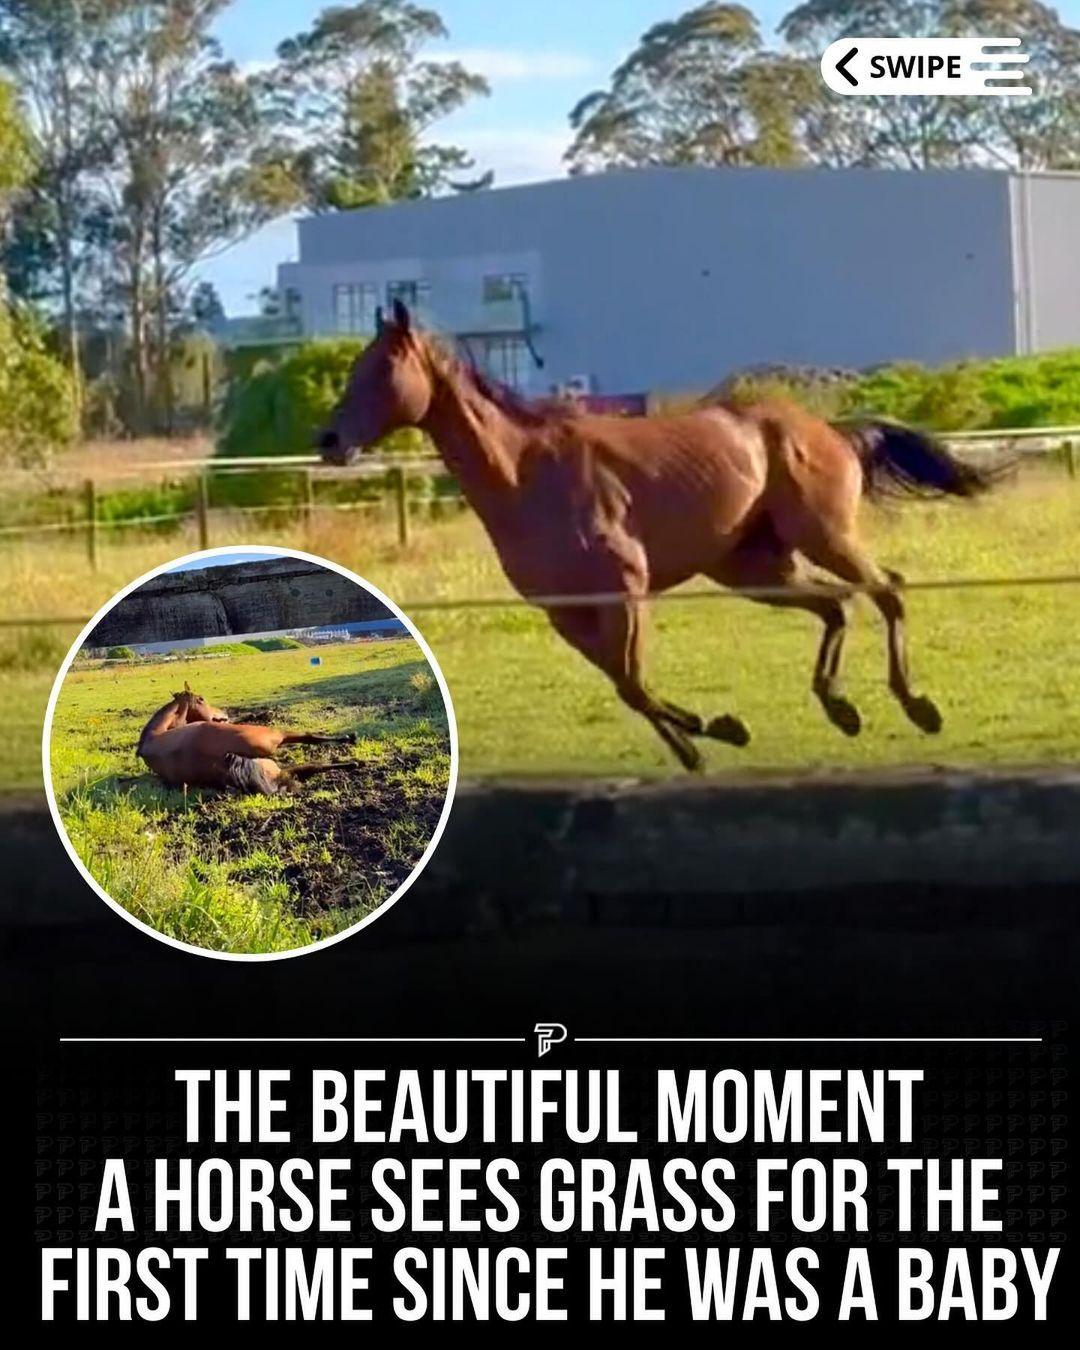 Swipe ⬅️ to watch the beautiful moment a horse is released to an open field of grass for the first time in 2 years. 🥹❤️

Via: @maija_vance